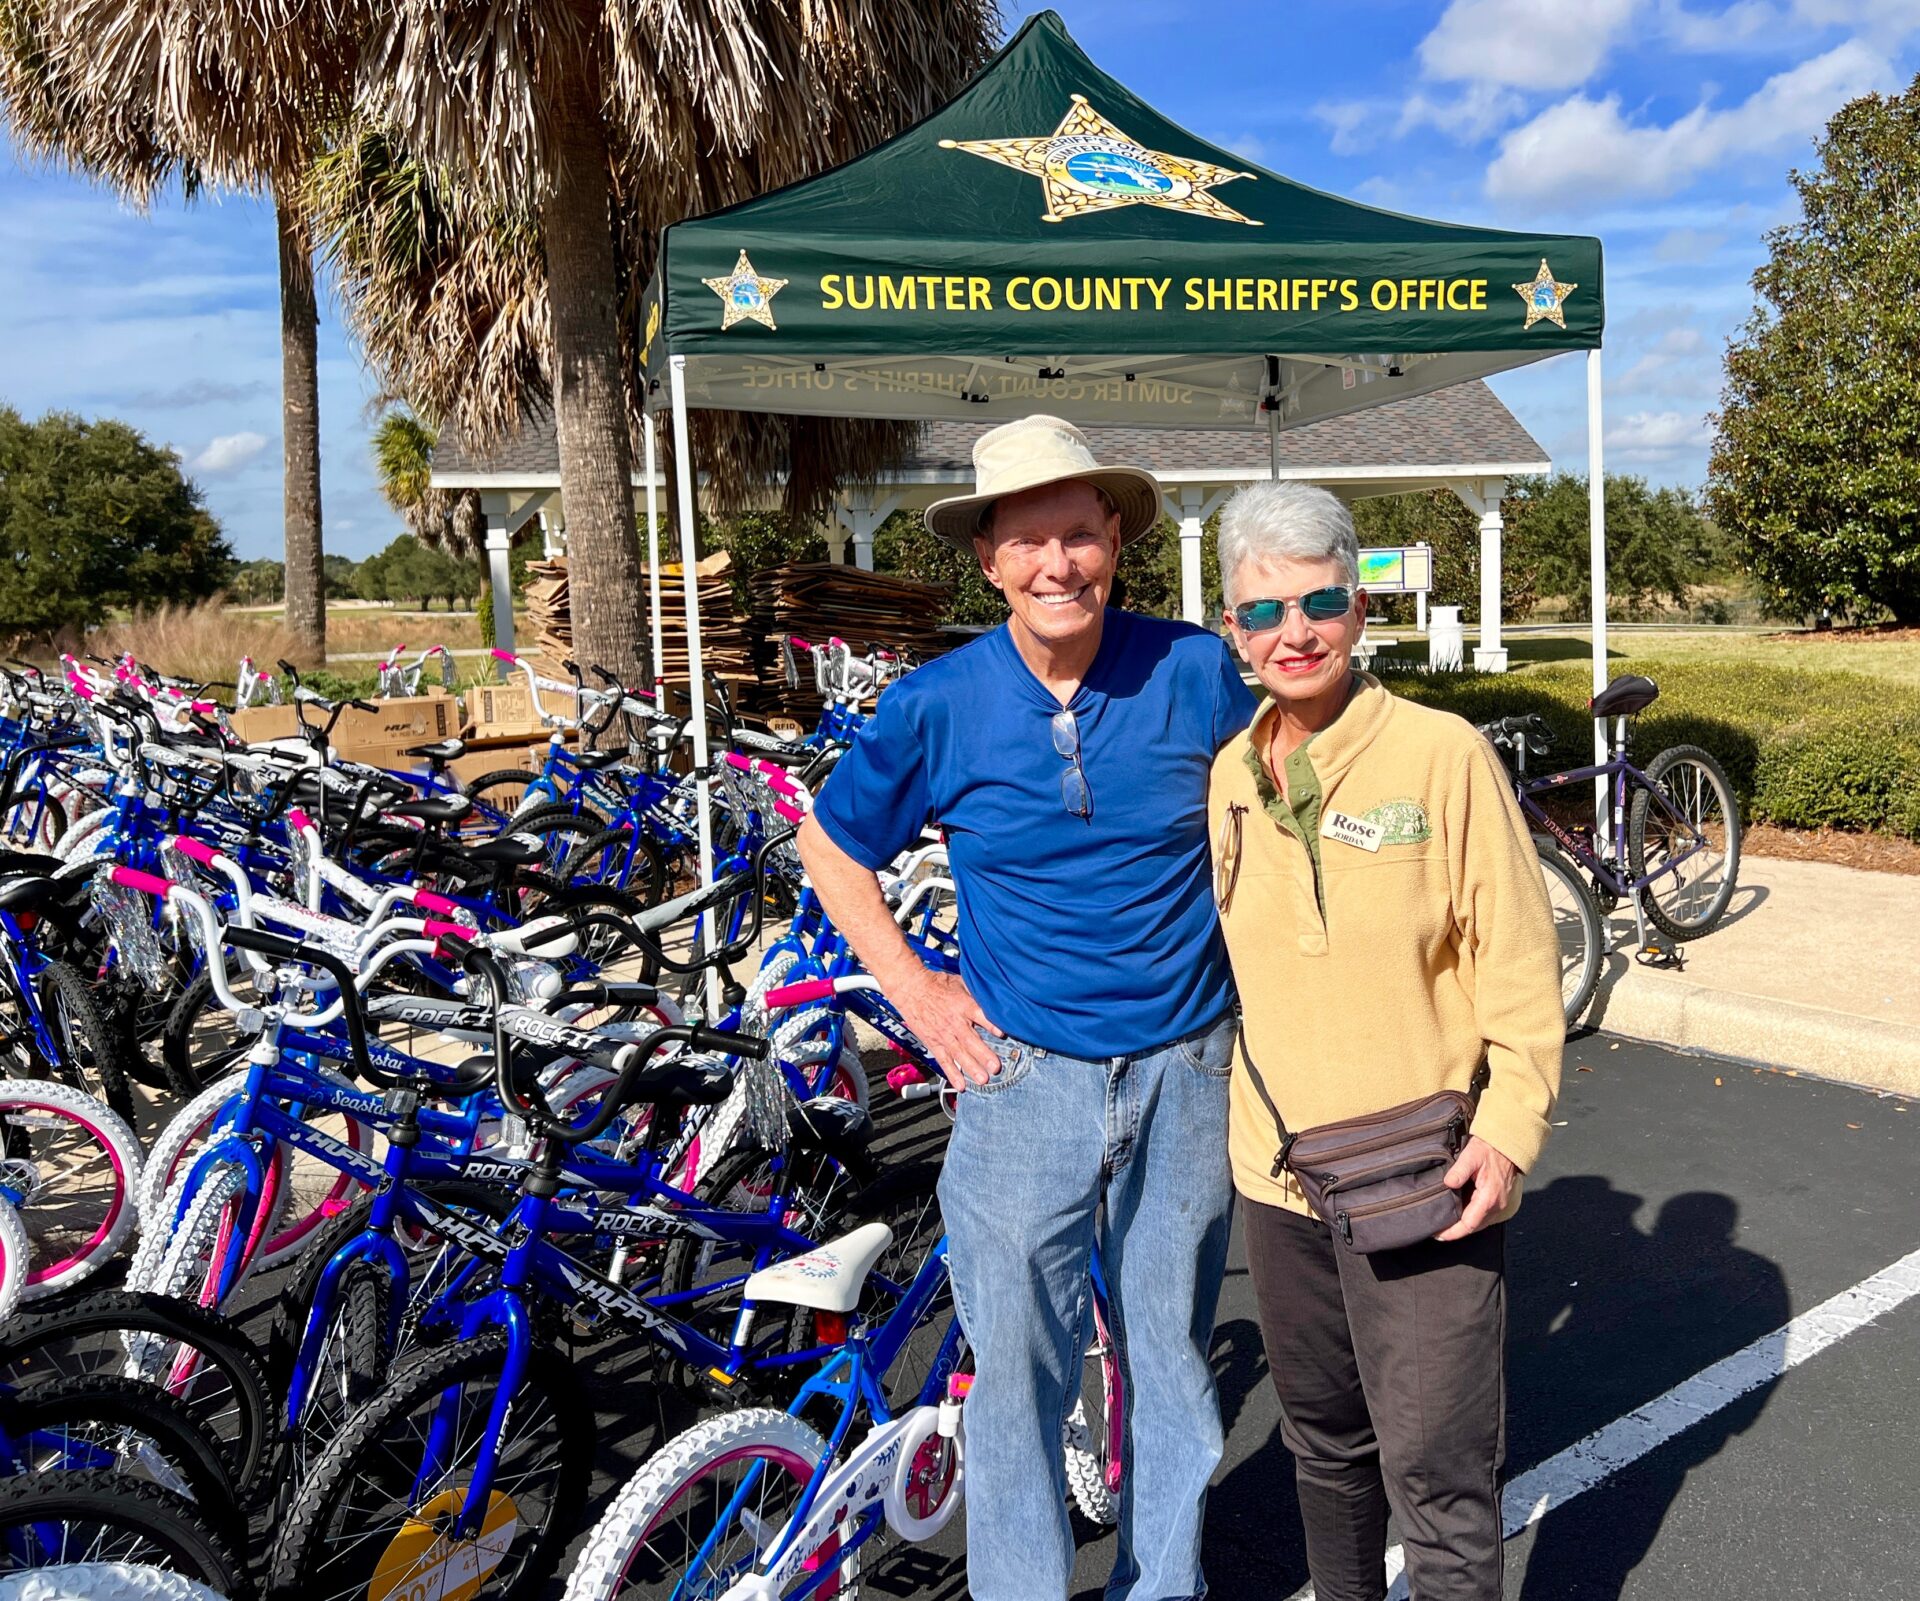 Villagers Bob and Rose Jordan have repaired and donated 150 bikes over the last three years.